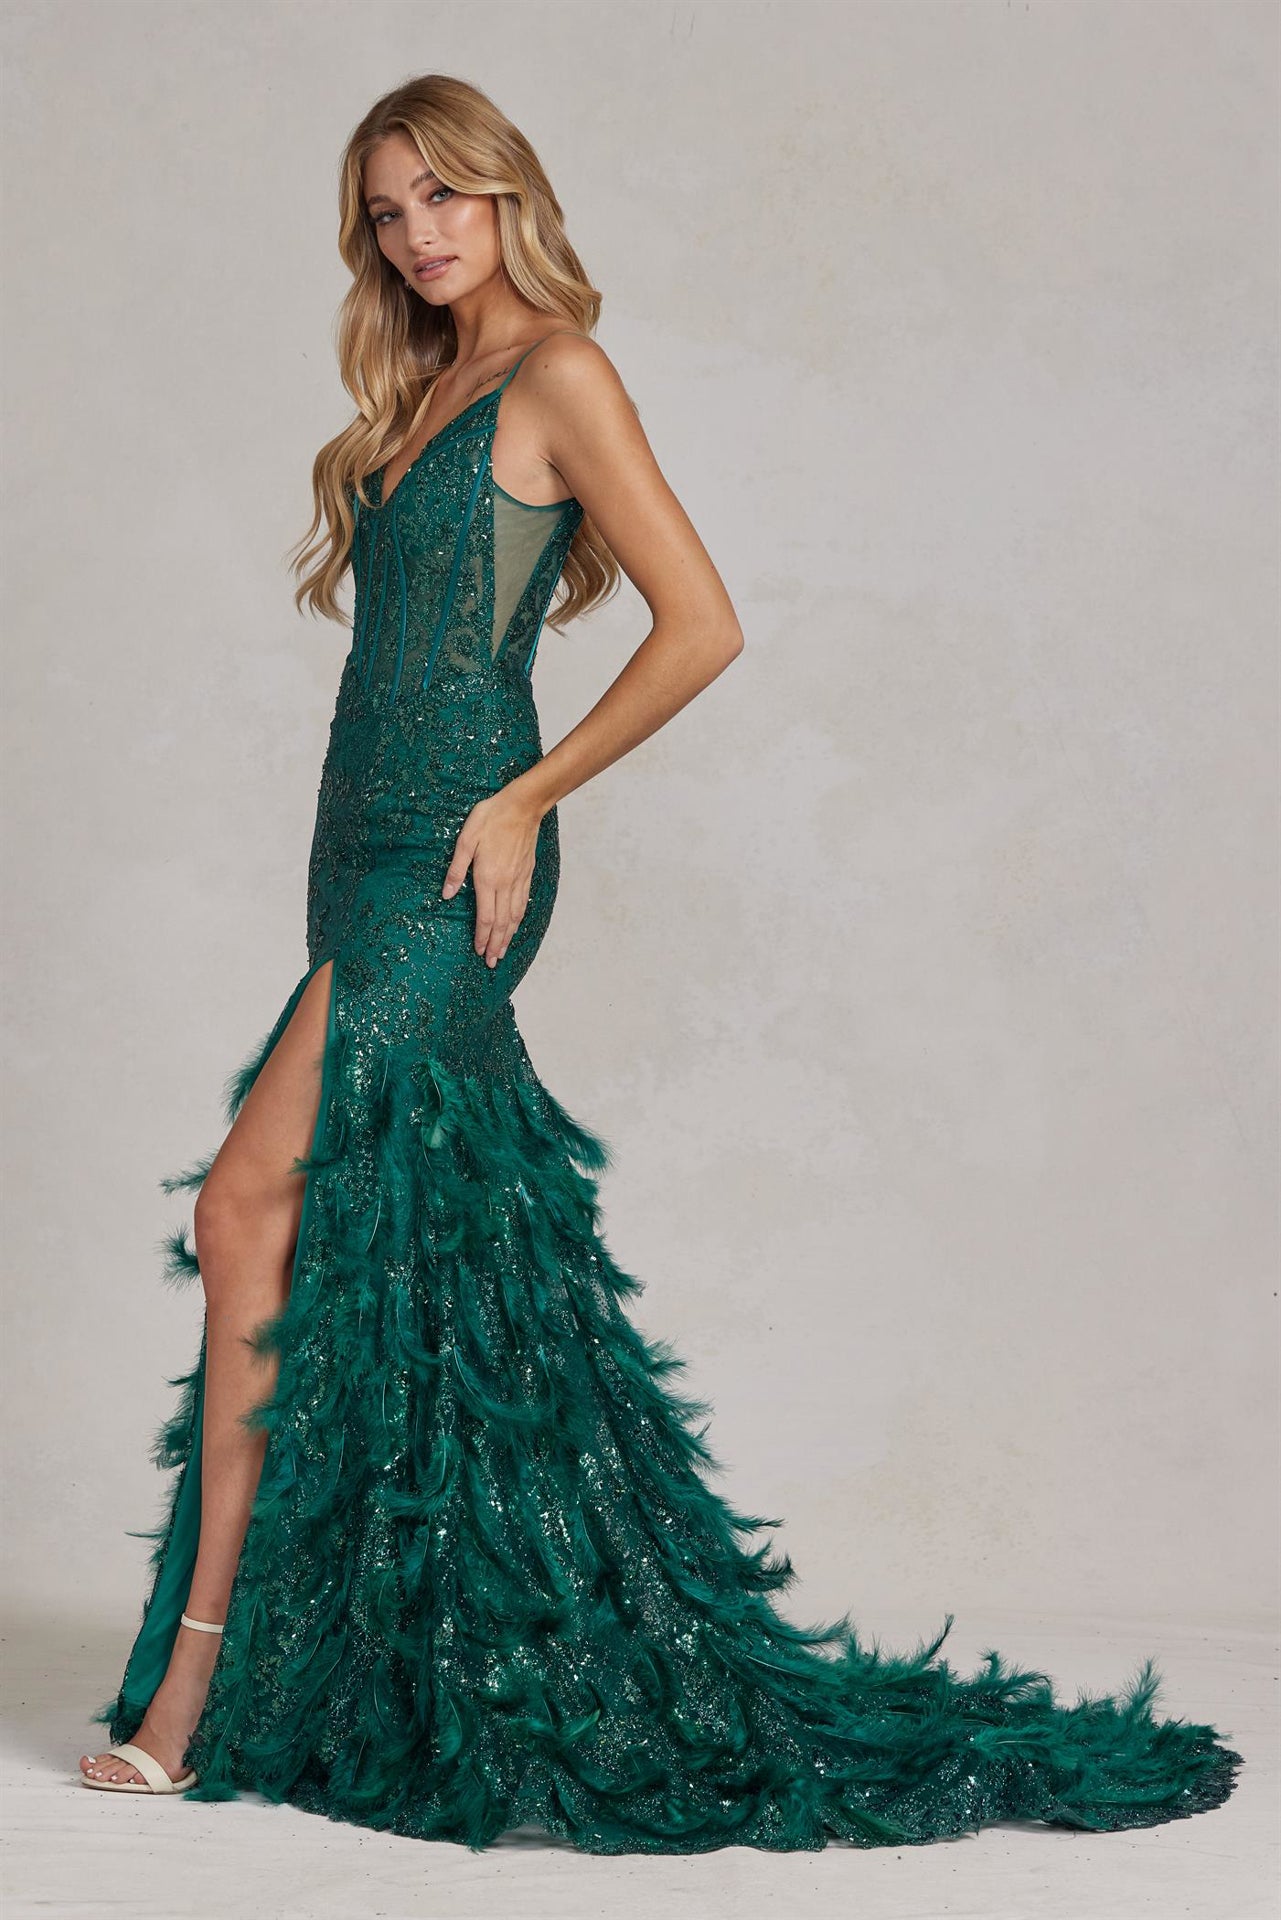 Luxury Ostrich Feather Feather Party Dress With Long Sleeves, V Neck,  Sequins Appliques, And Side Slit Customizable For Formal Prom And Evening  Events From Warlikeman, $237.29